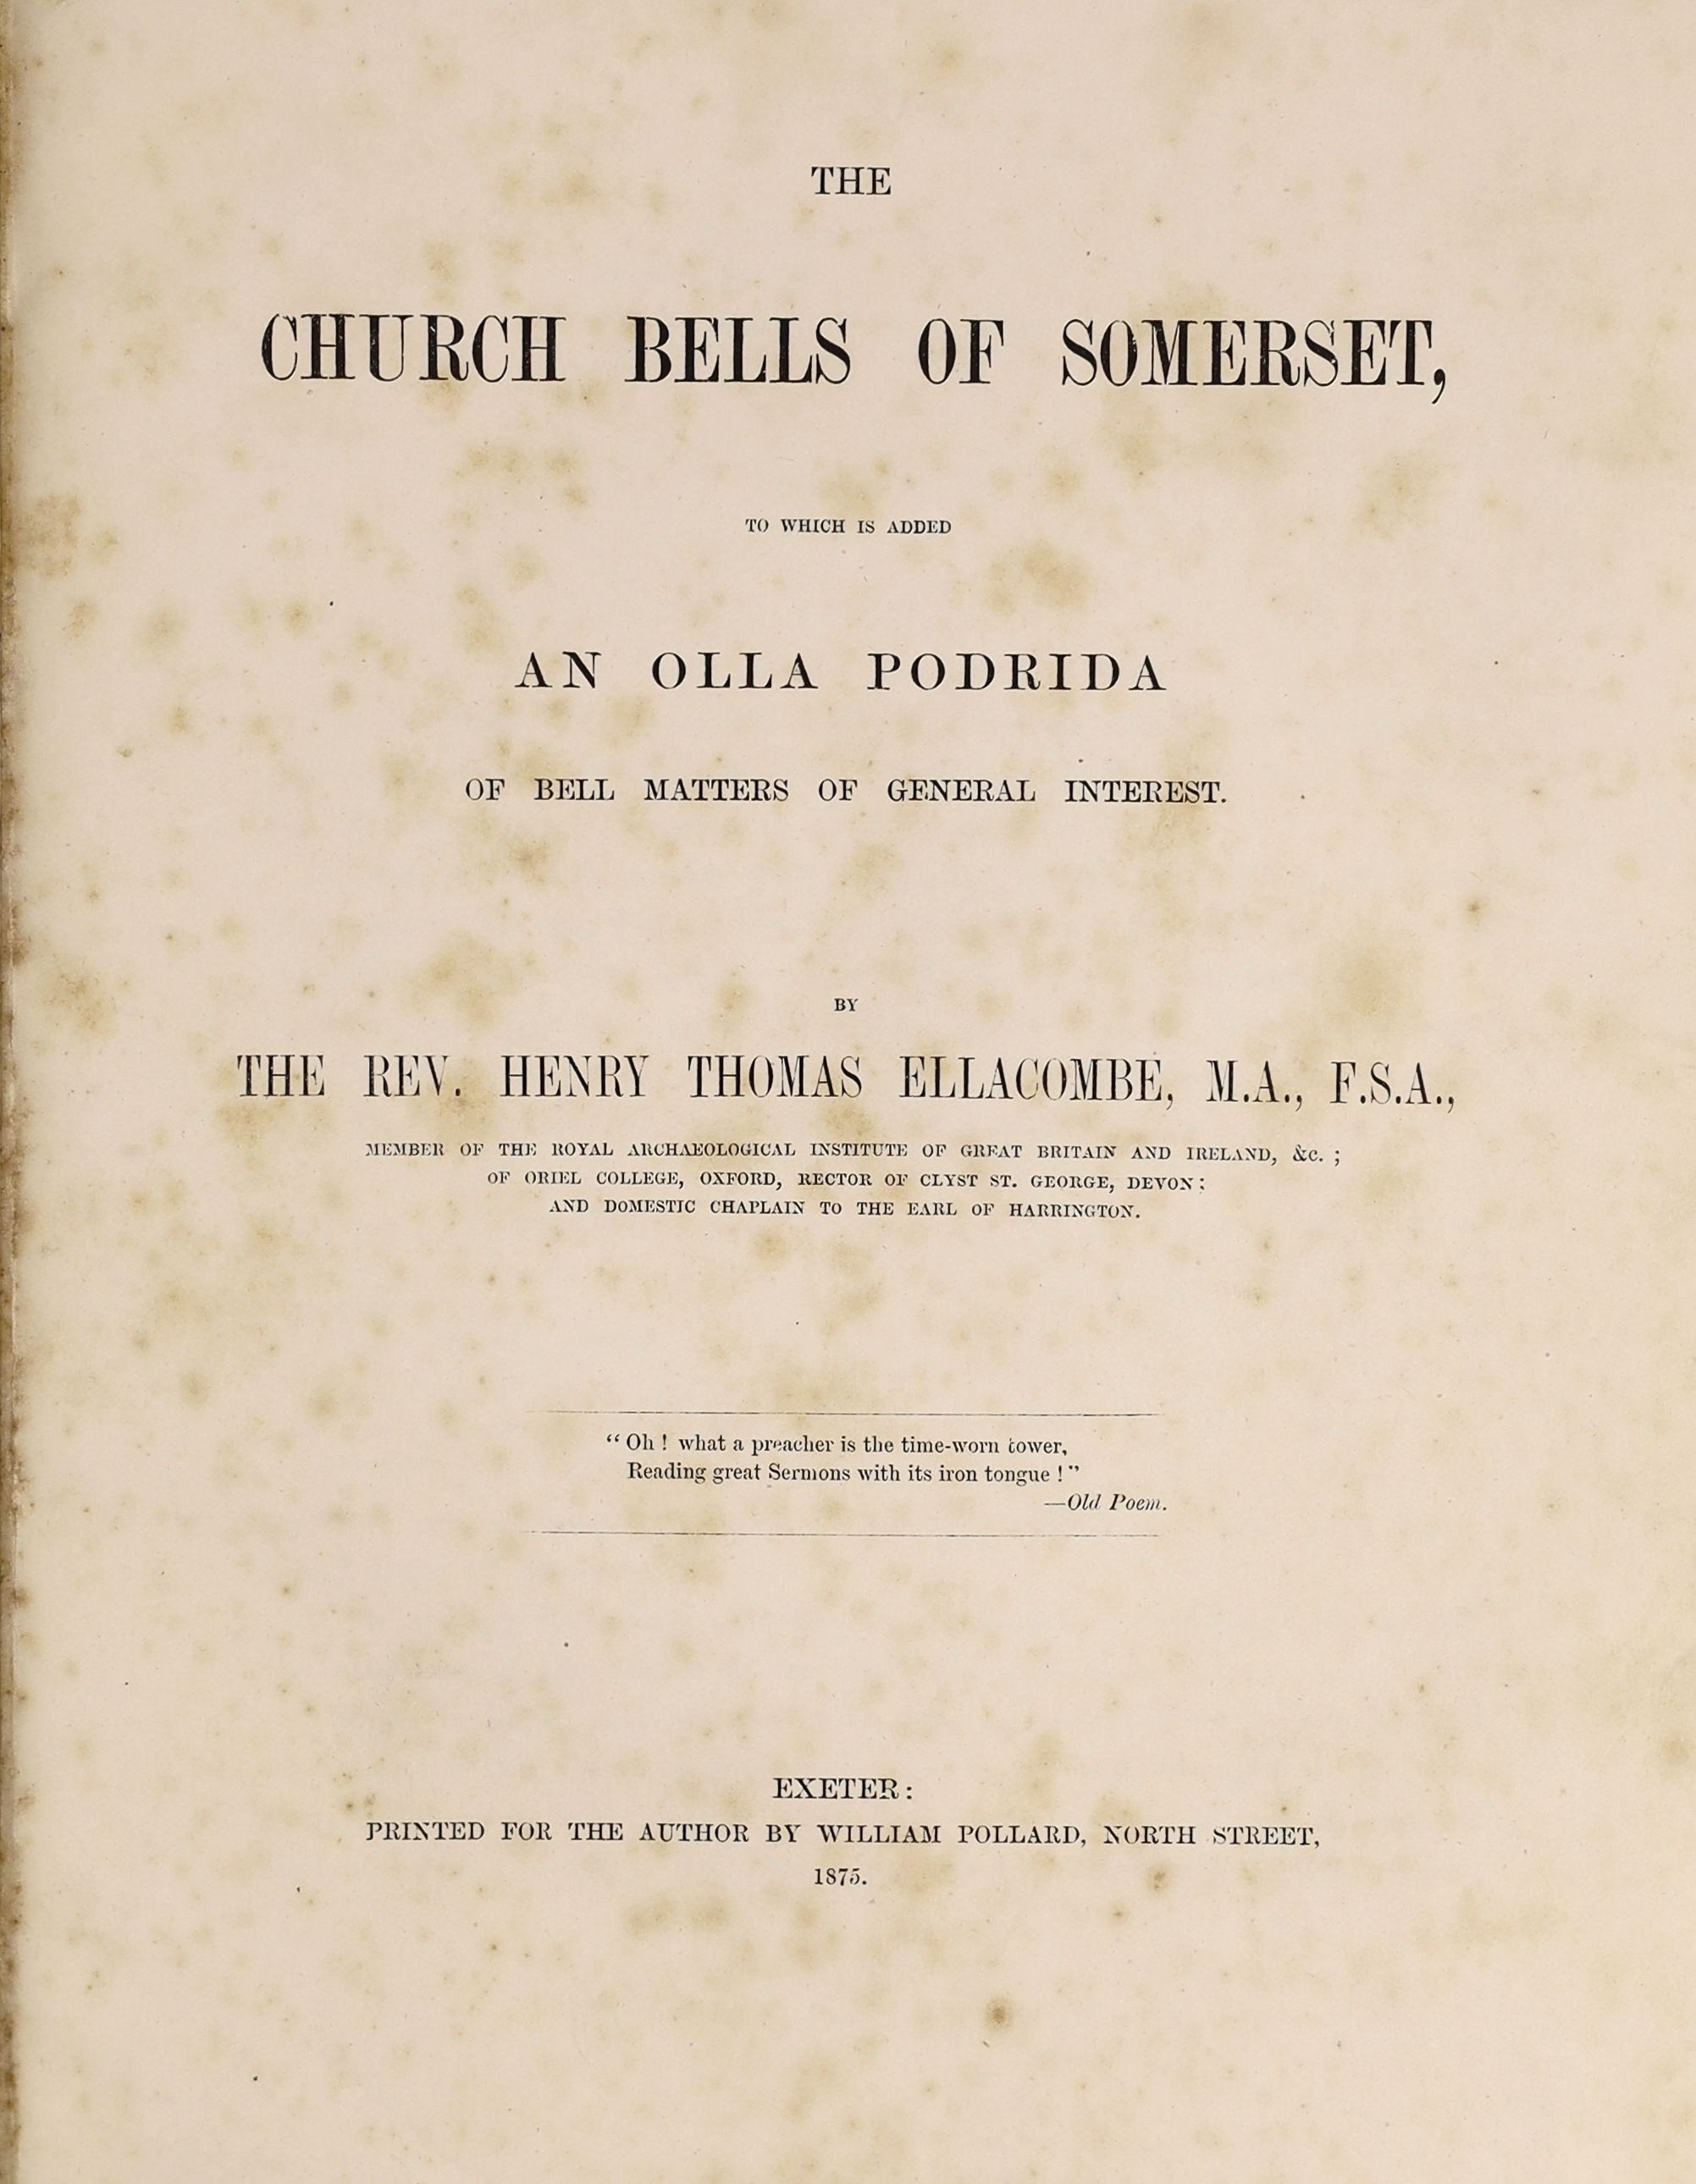 Robinson, John Martin - West Country Churches, 4 vols, 8vo, half blue morocco gilt, Bristol Times and Mirror, 1914-16 and Ellacombe, Reverend Henry Thomas - The Church Bells of Somerset, 4to, rebound crushed brown morocc